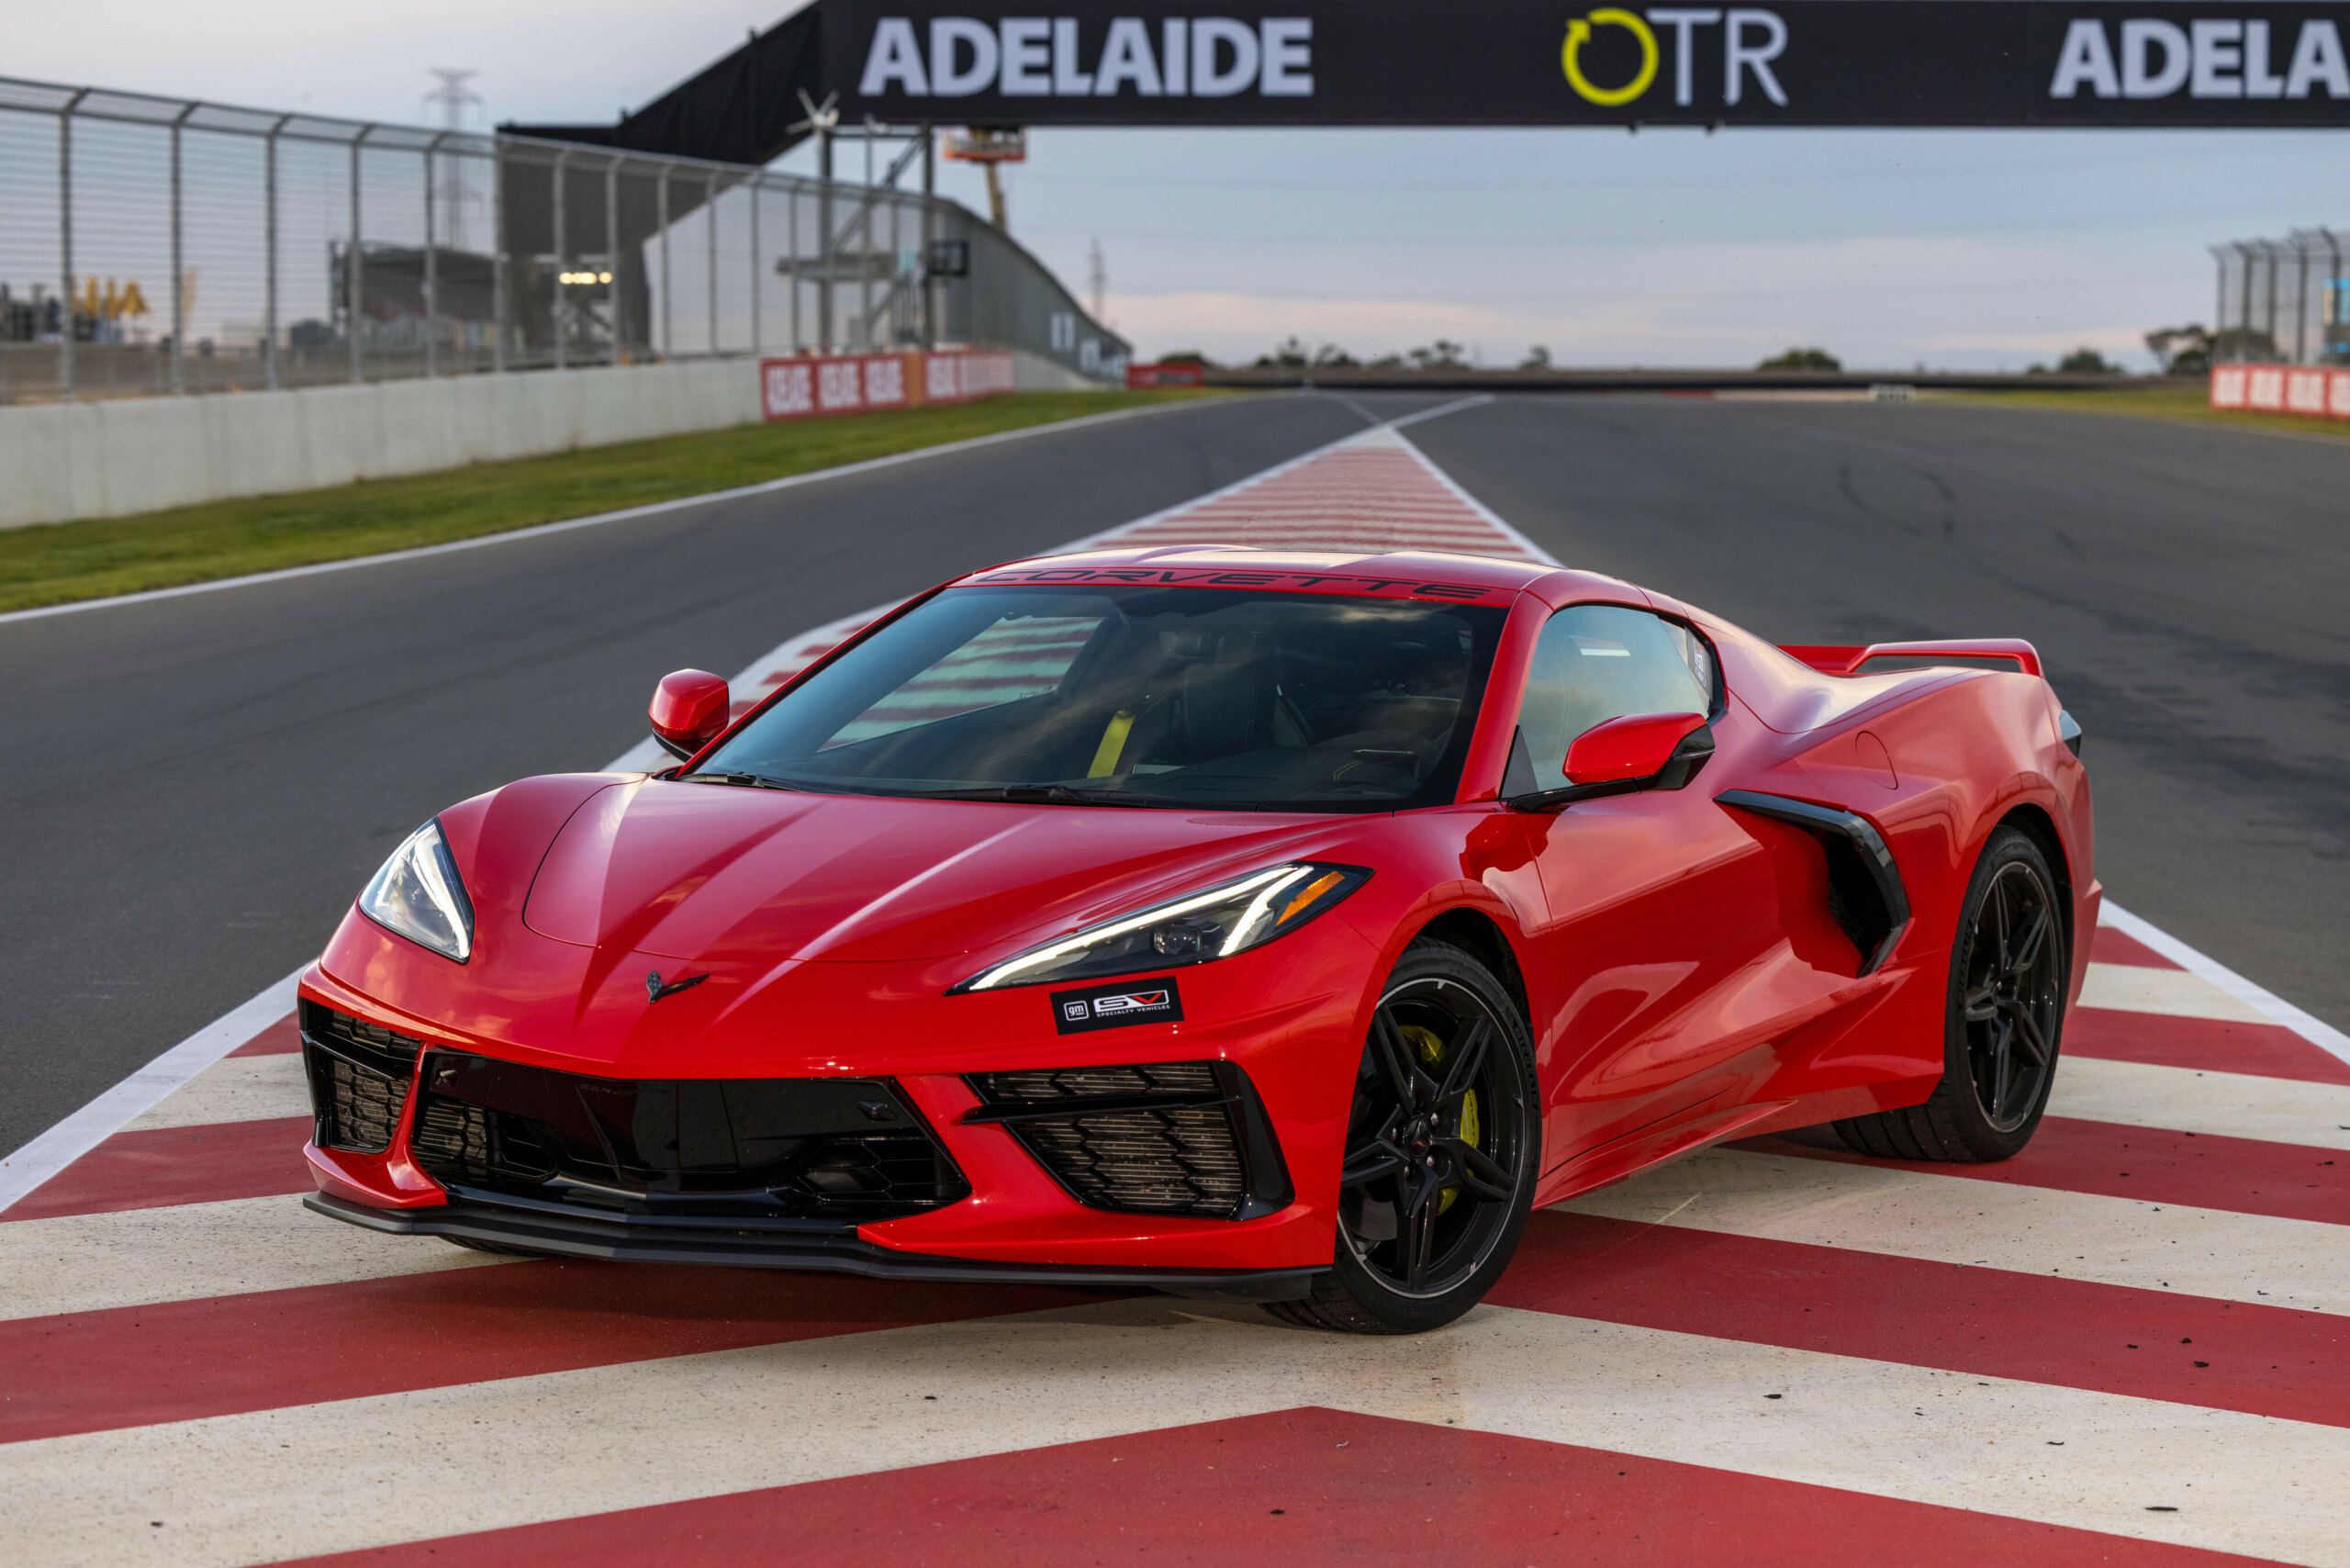 Craig Lowndes samples the C8 Corvette at The Bend